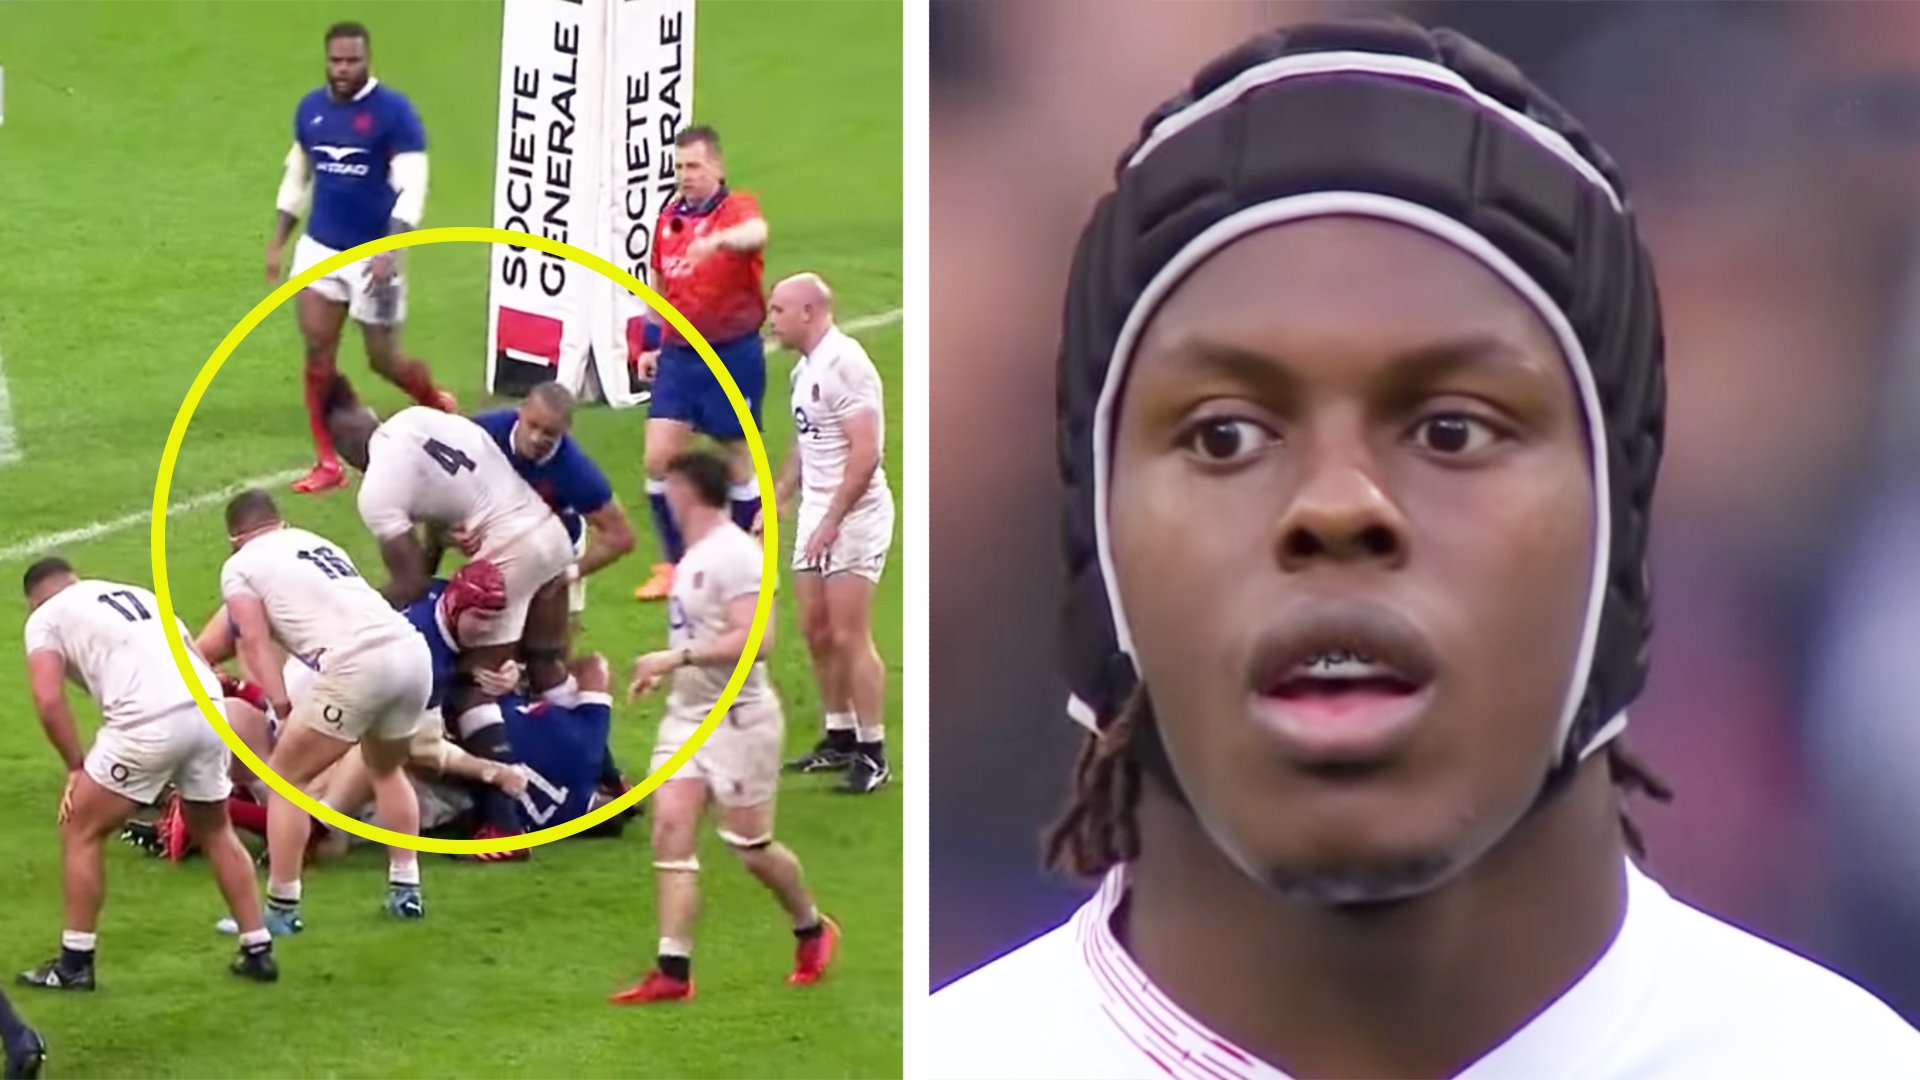 The Maro Itoje reaction to French gamesmanship that confused the rugby world